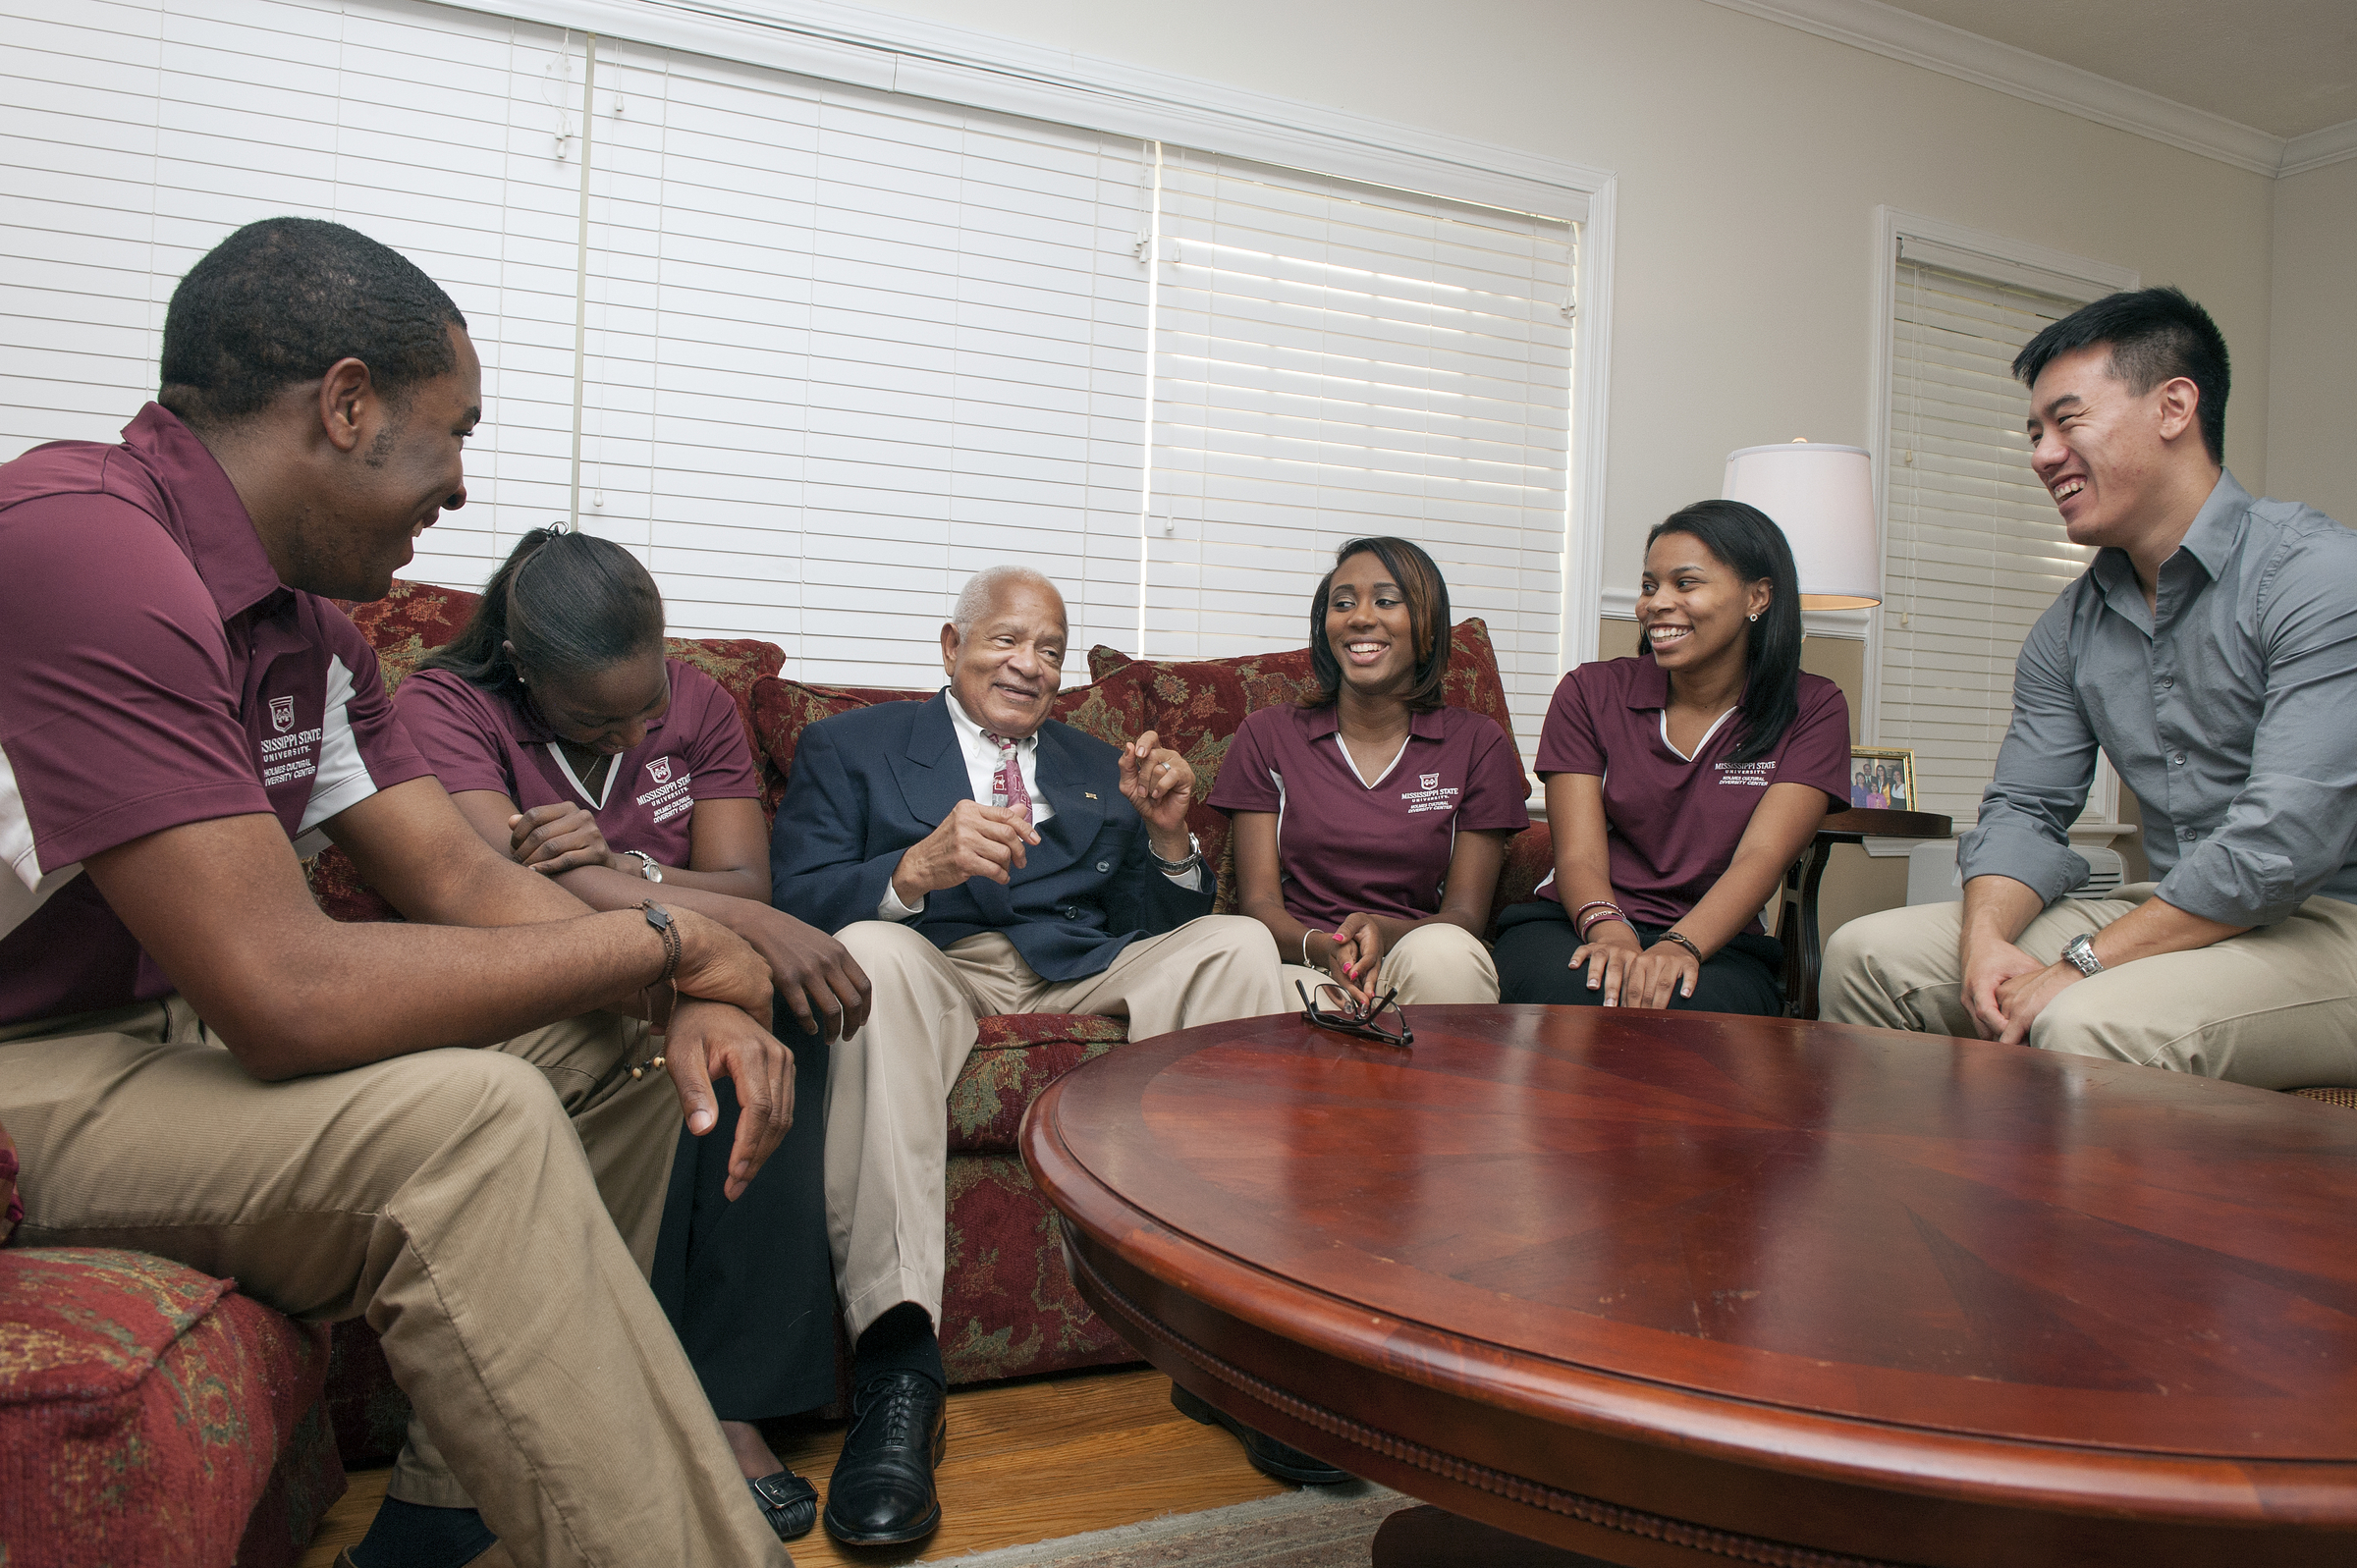 Mississippi State University's Office of Institutional Diversity and Inclusion works to promote and encourage diversity across the 137-year-old land-grant campus. Here, a group of students meet with Dr. Richard Holmes of Columbus, center, the first African American student to attend MSU in 1964. 